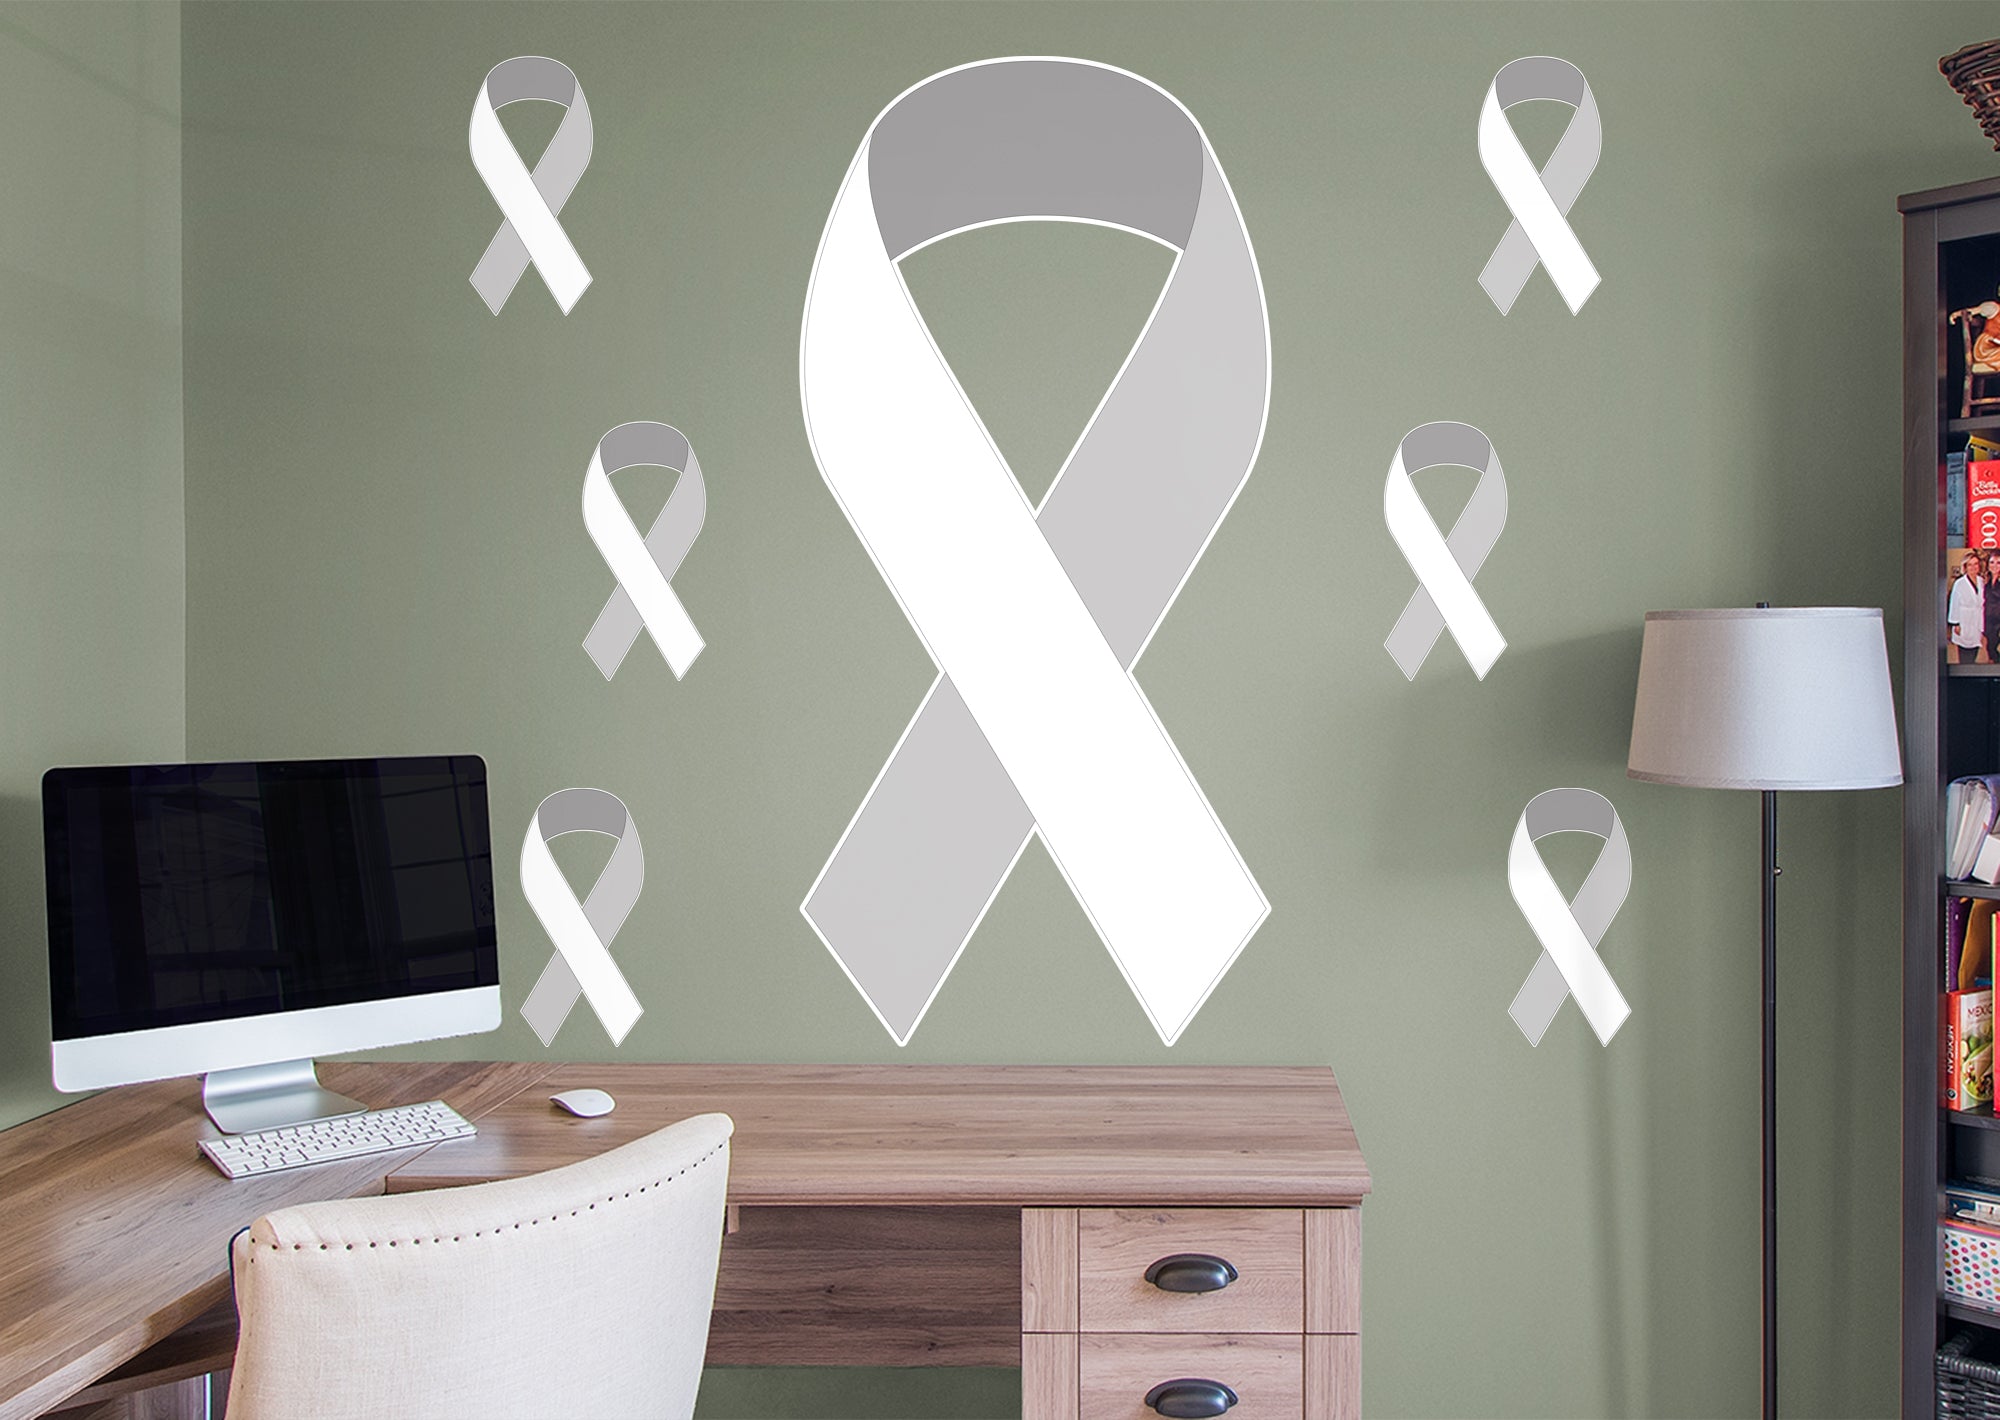 Colors of Cancer Ribbons: American Cancer Society Removable Wall Decal Giant Lung Cancer Ribbon + 6 Decals (24"W x 51"H) by Fath